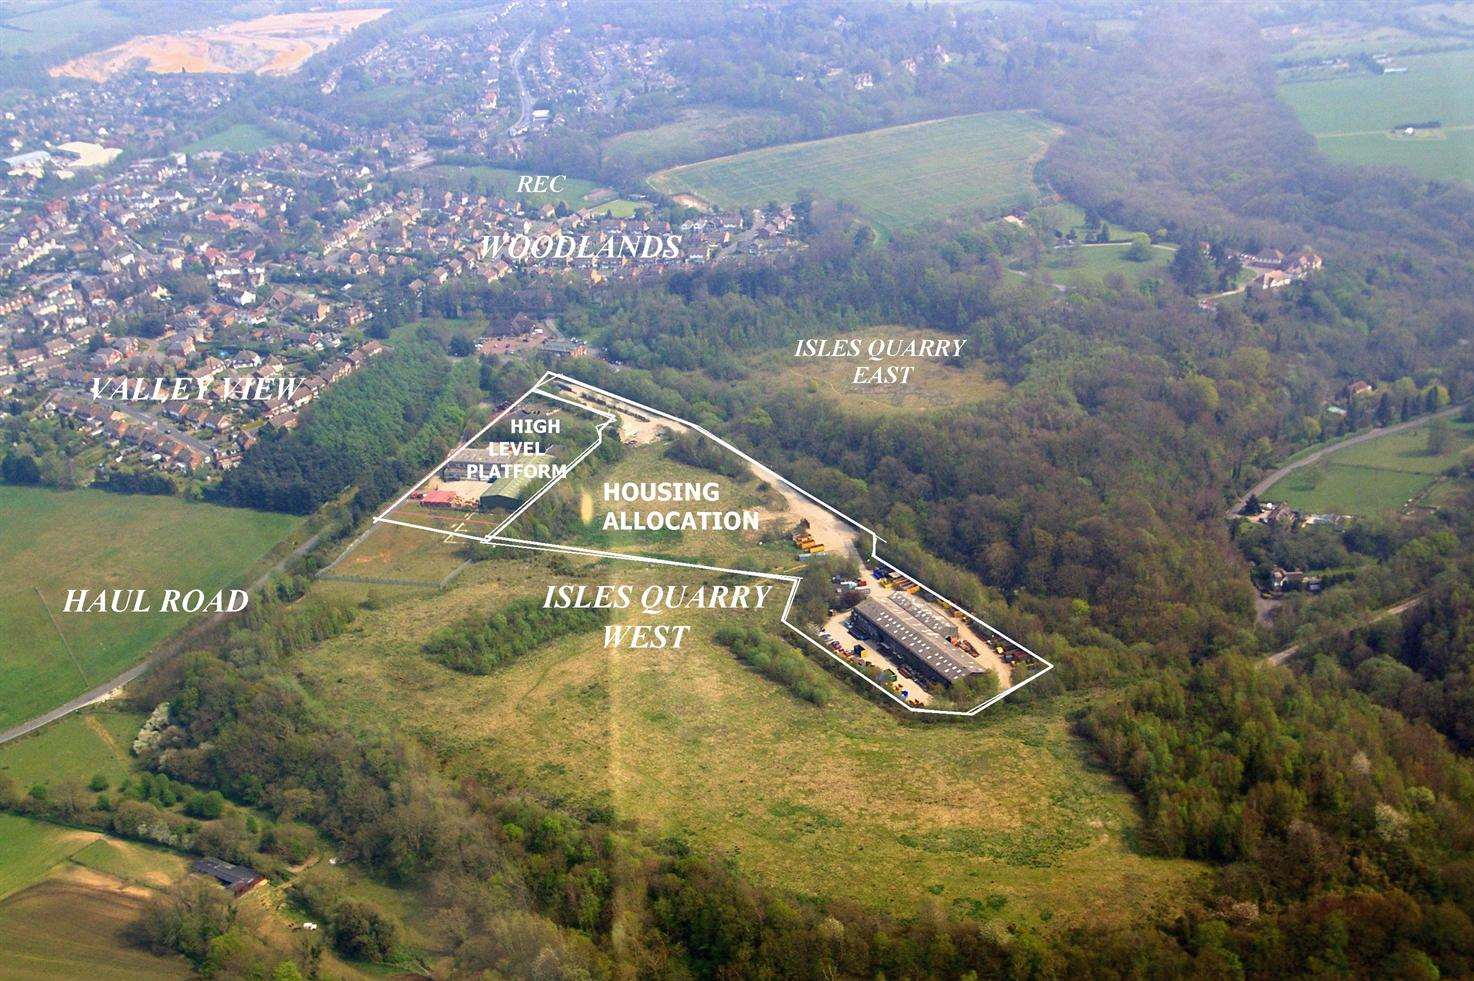 The Isles Quarry site has been at the centre of planning rows for years